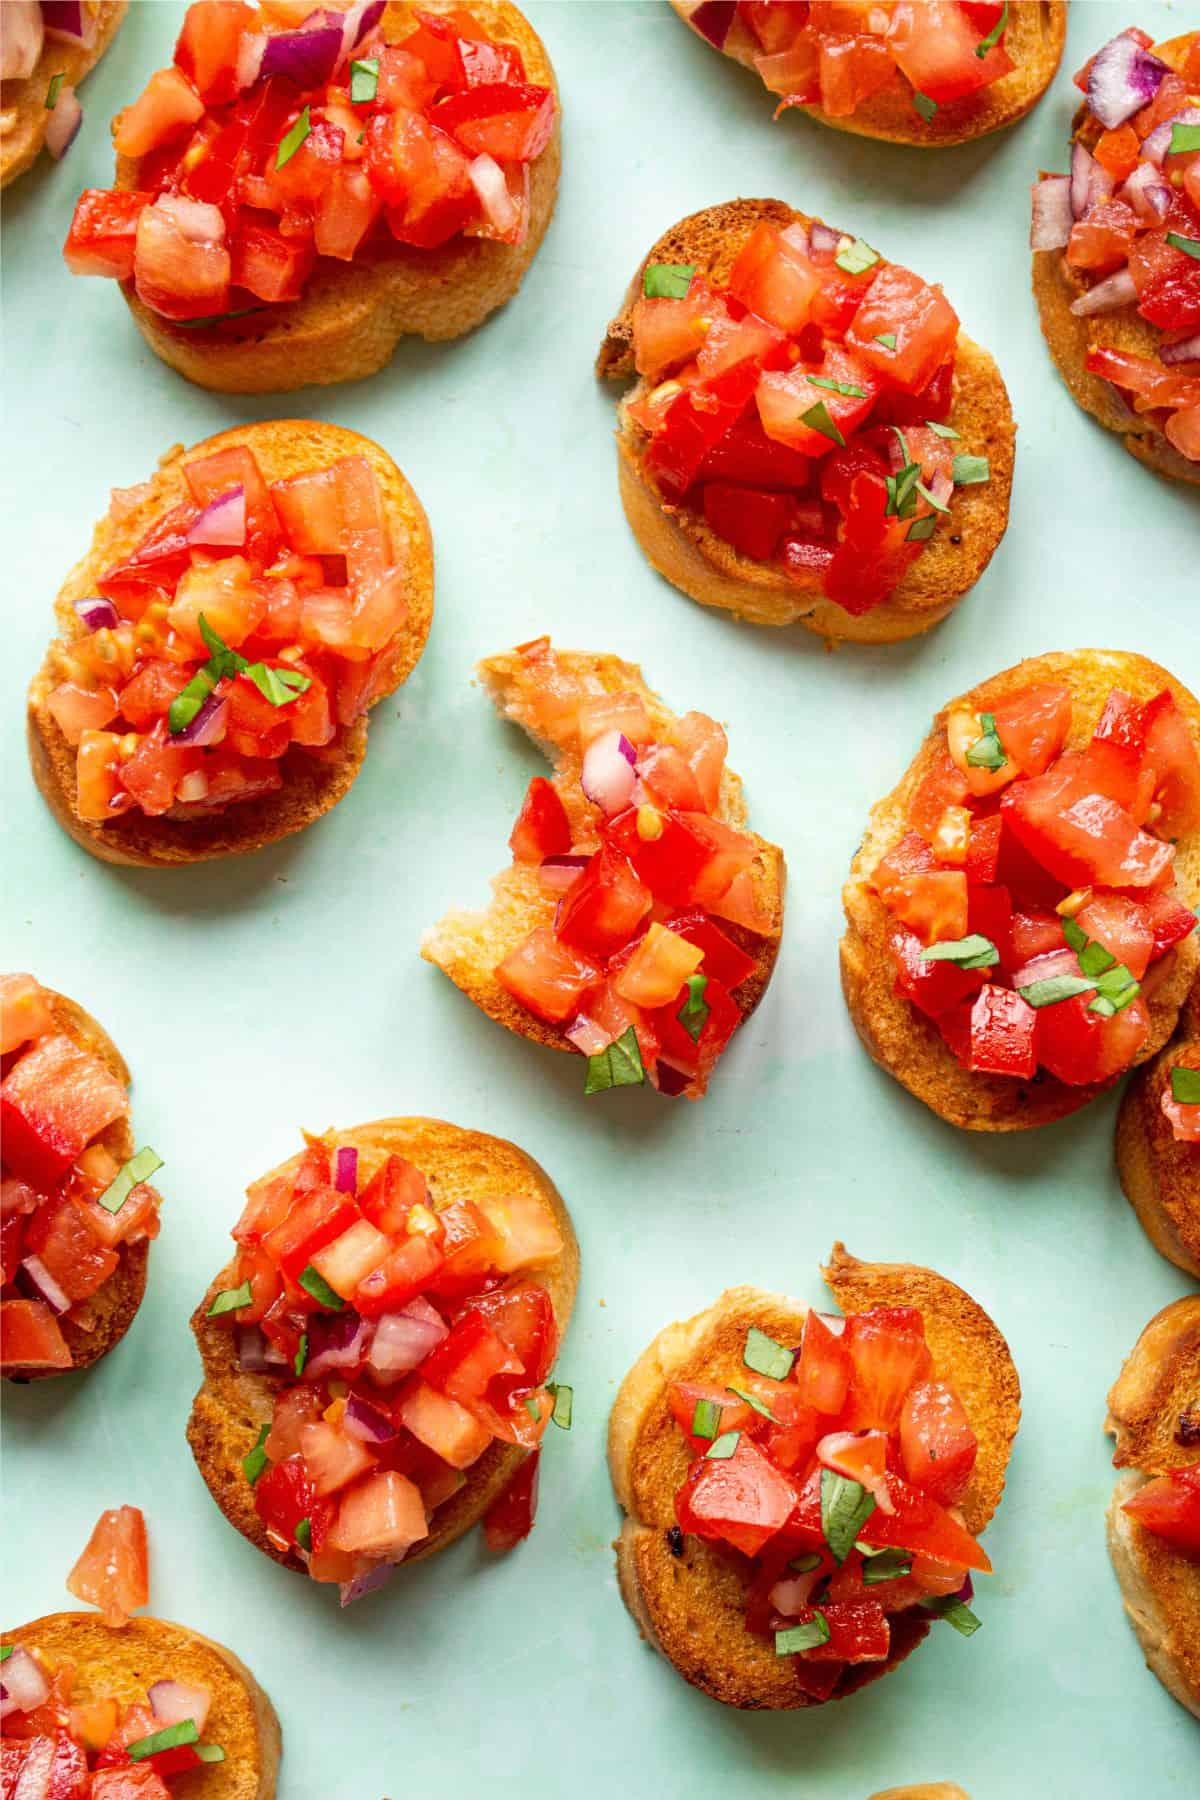 Small rounds of toasted bread on a pale background and topped with chopped tomatoes and onions.